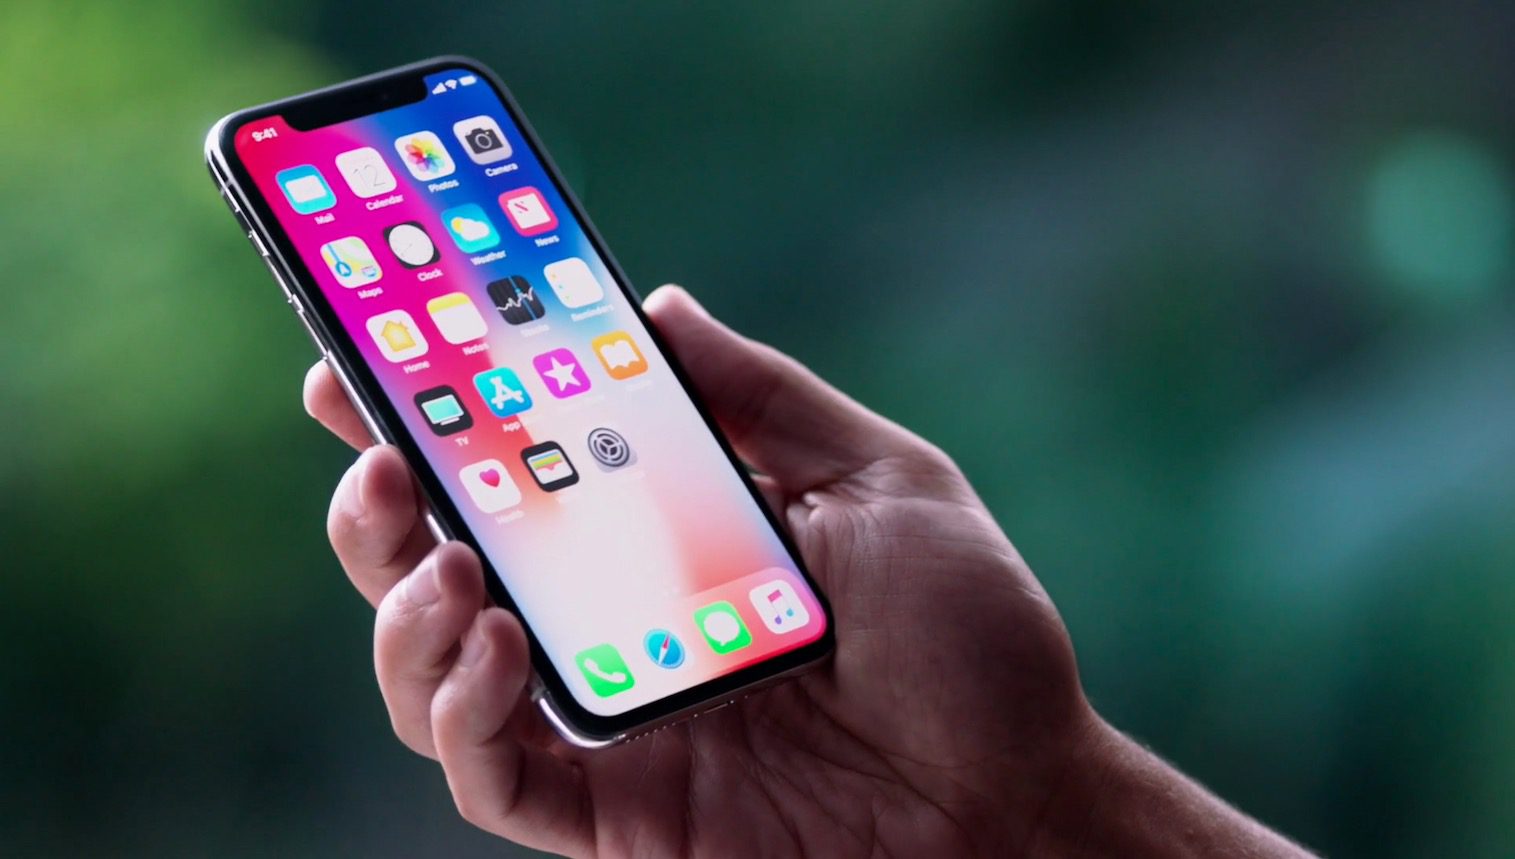 Apple iPhone X hands-on